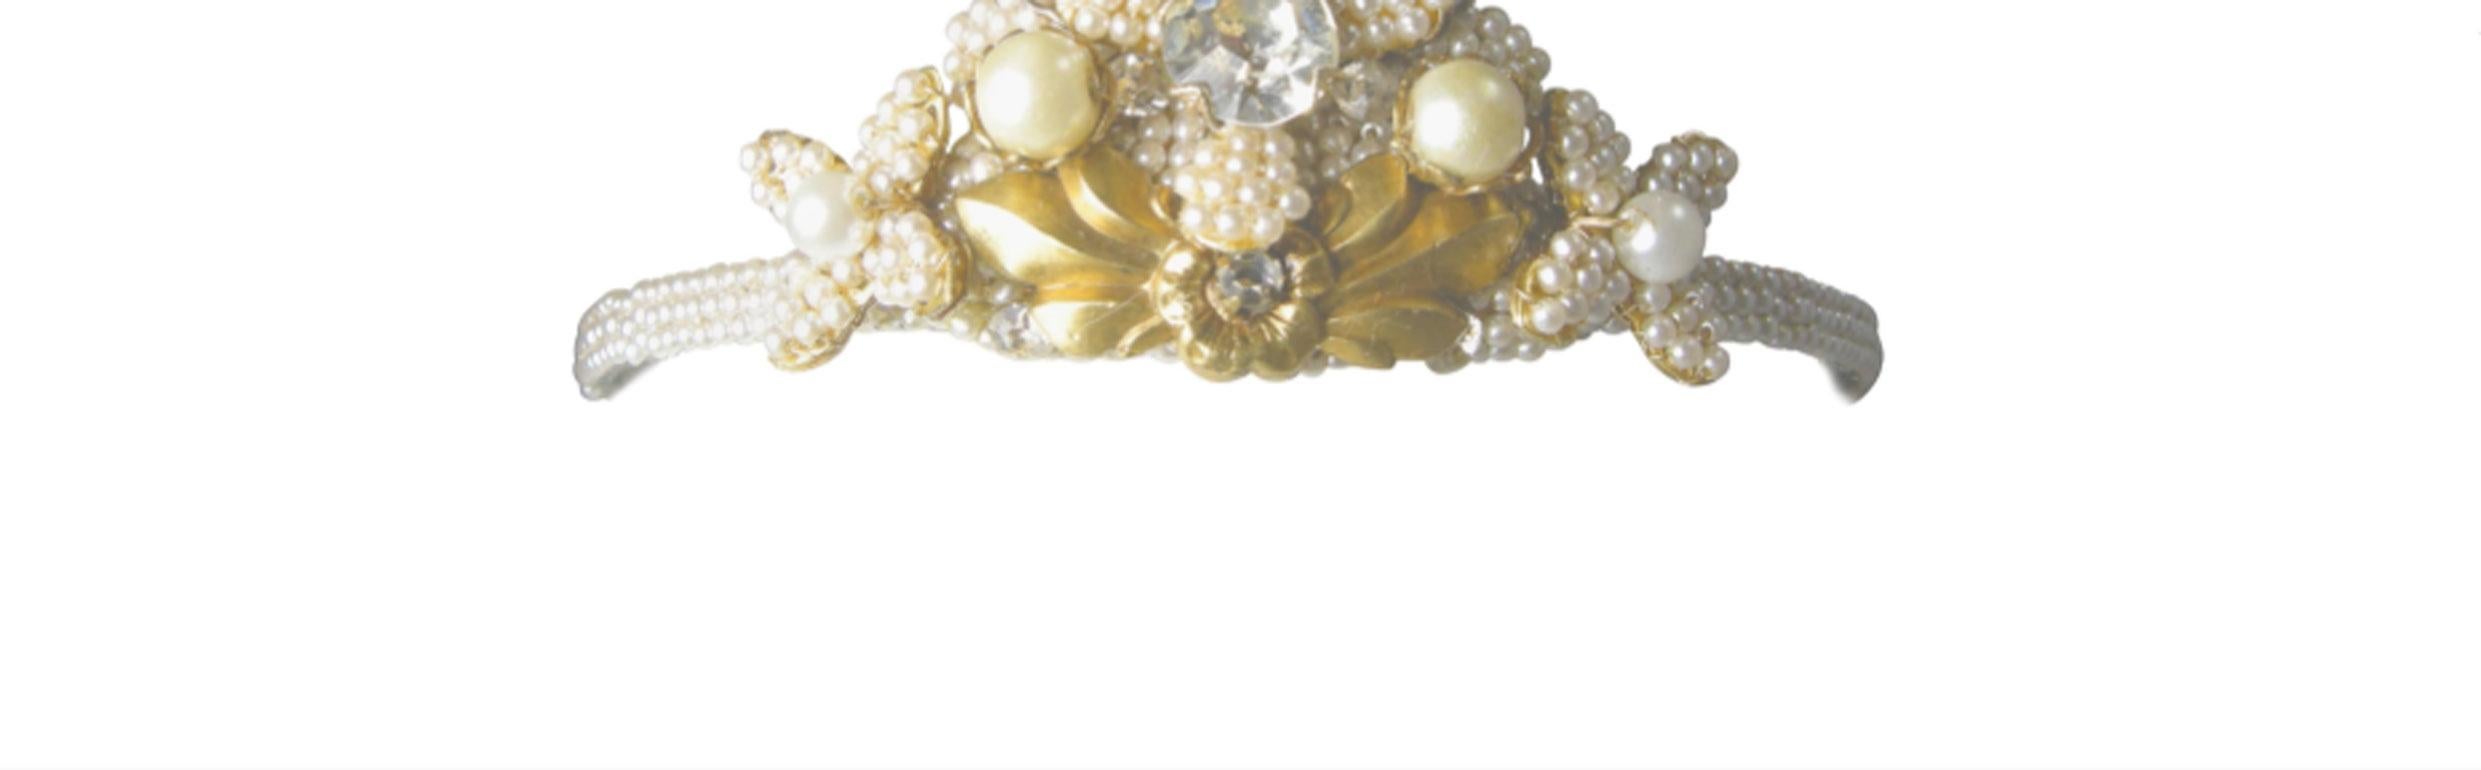 Women's or Men's Rare Vintage Miriam Haskell Faux Pearl Tiara/Headband For Sale